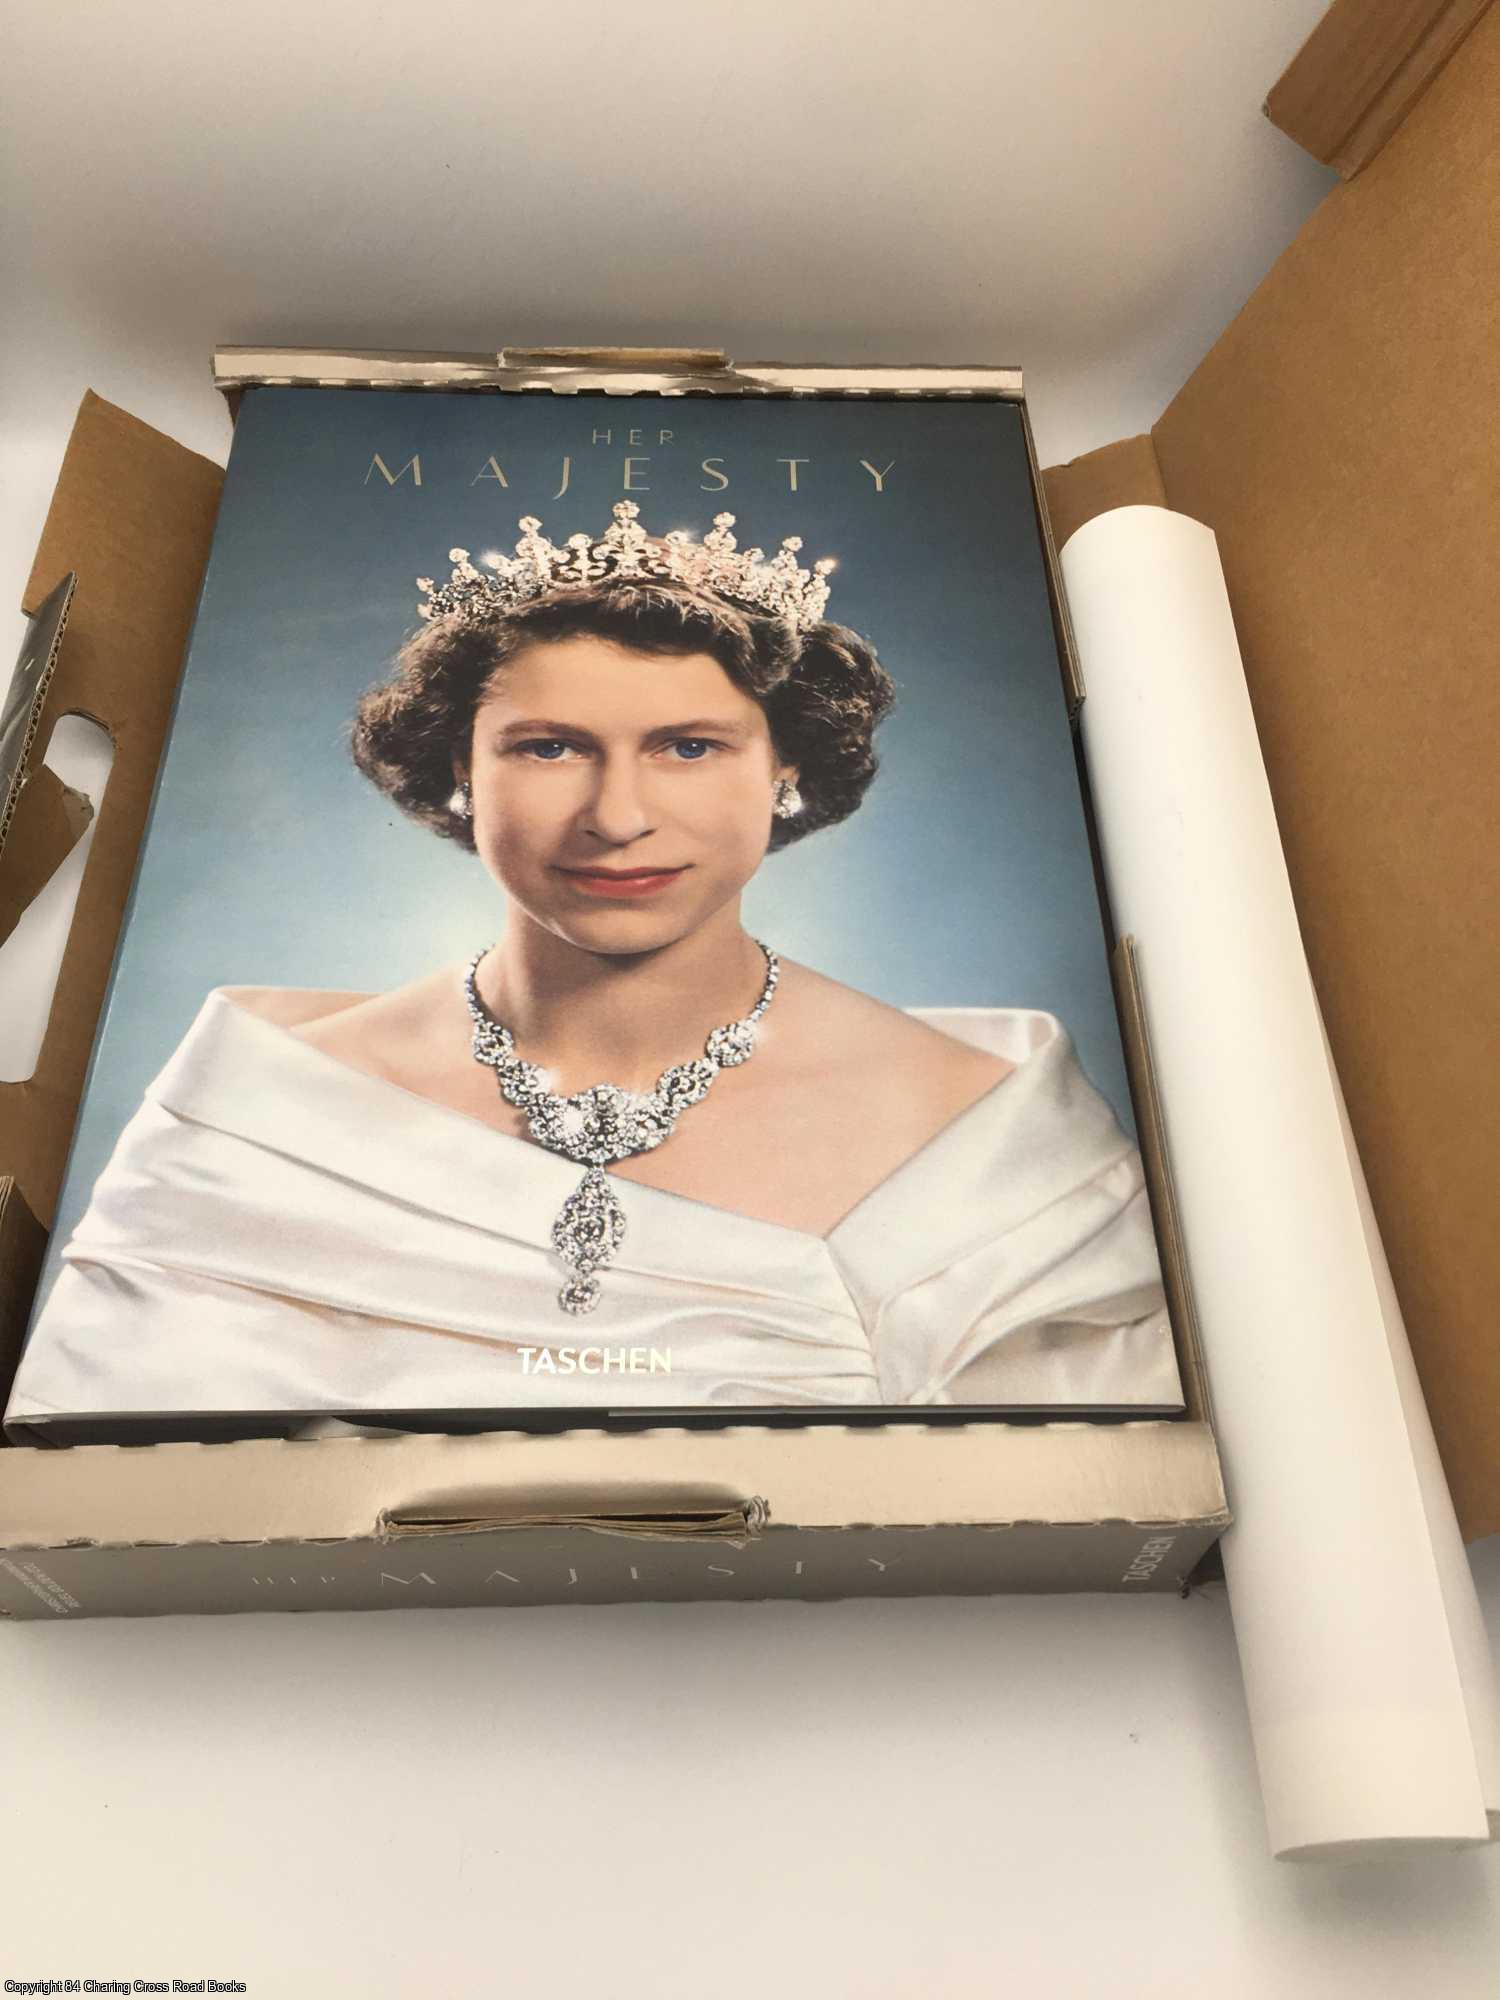 Her Majesty boxed XXL, with poster by Christopher Warwick on 84 Charing  Cross Rare Books